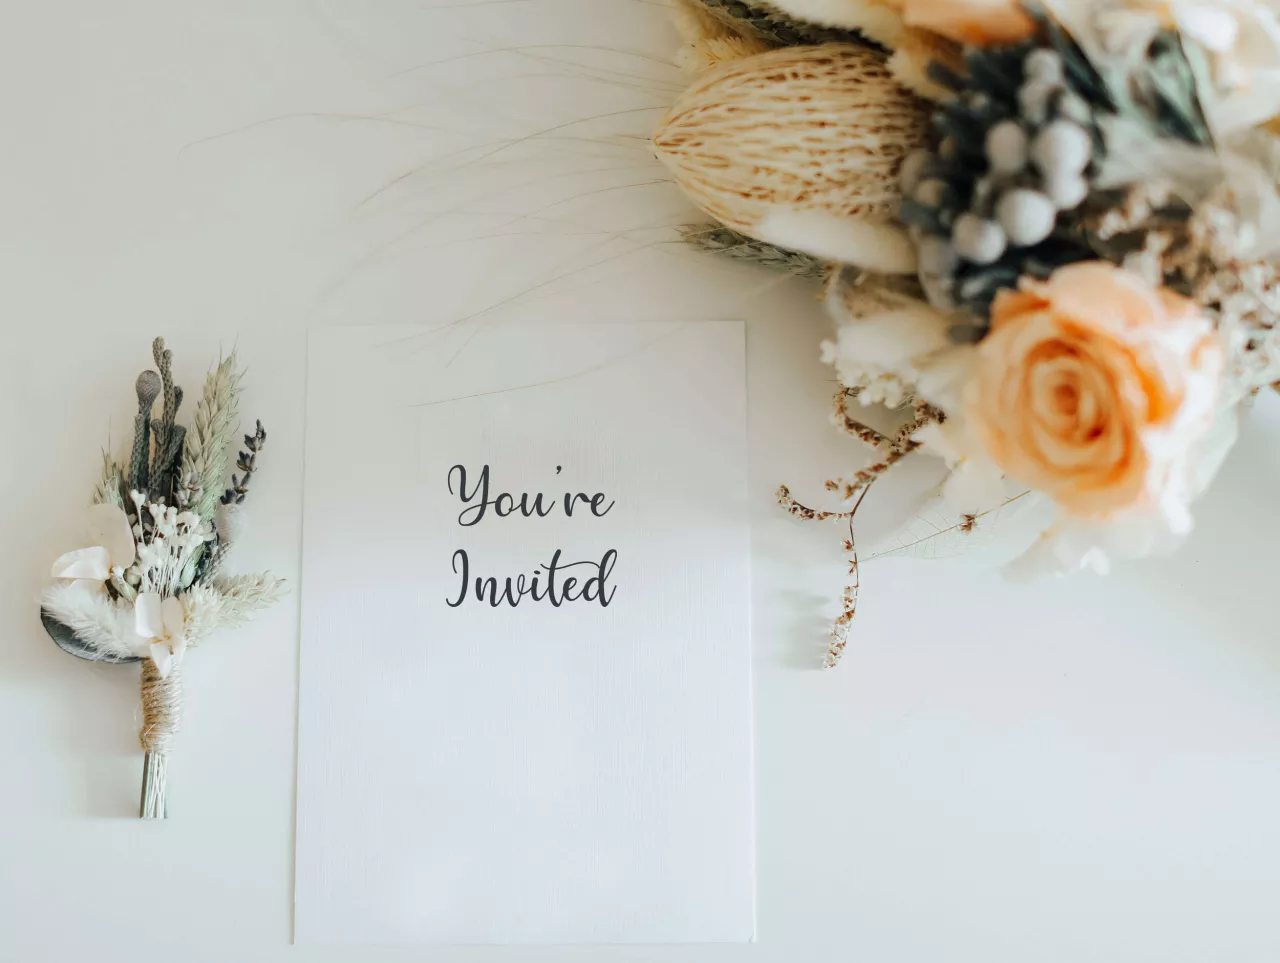 White wedding invitation with colorful flowers beside it